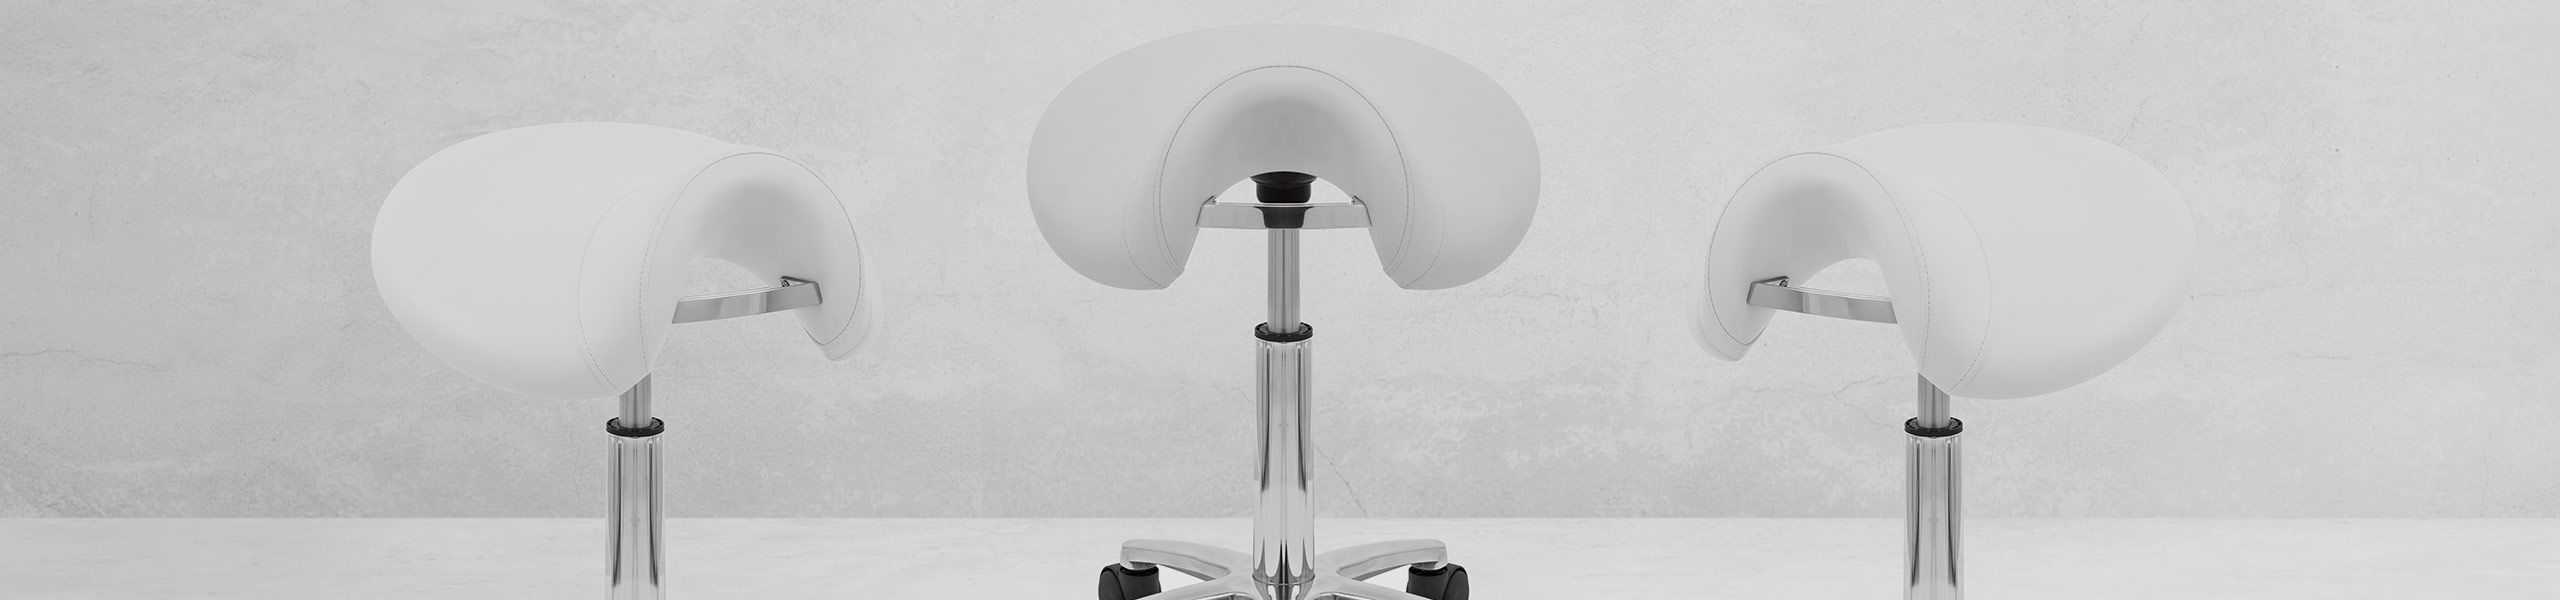 Deluxe Saddle Stool White Video Banner